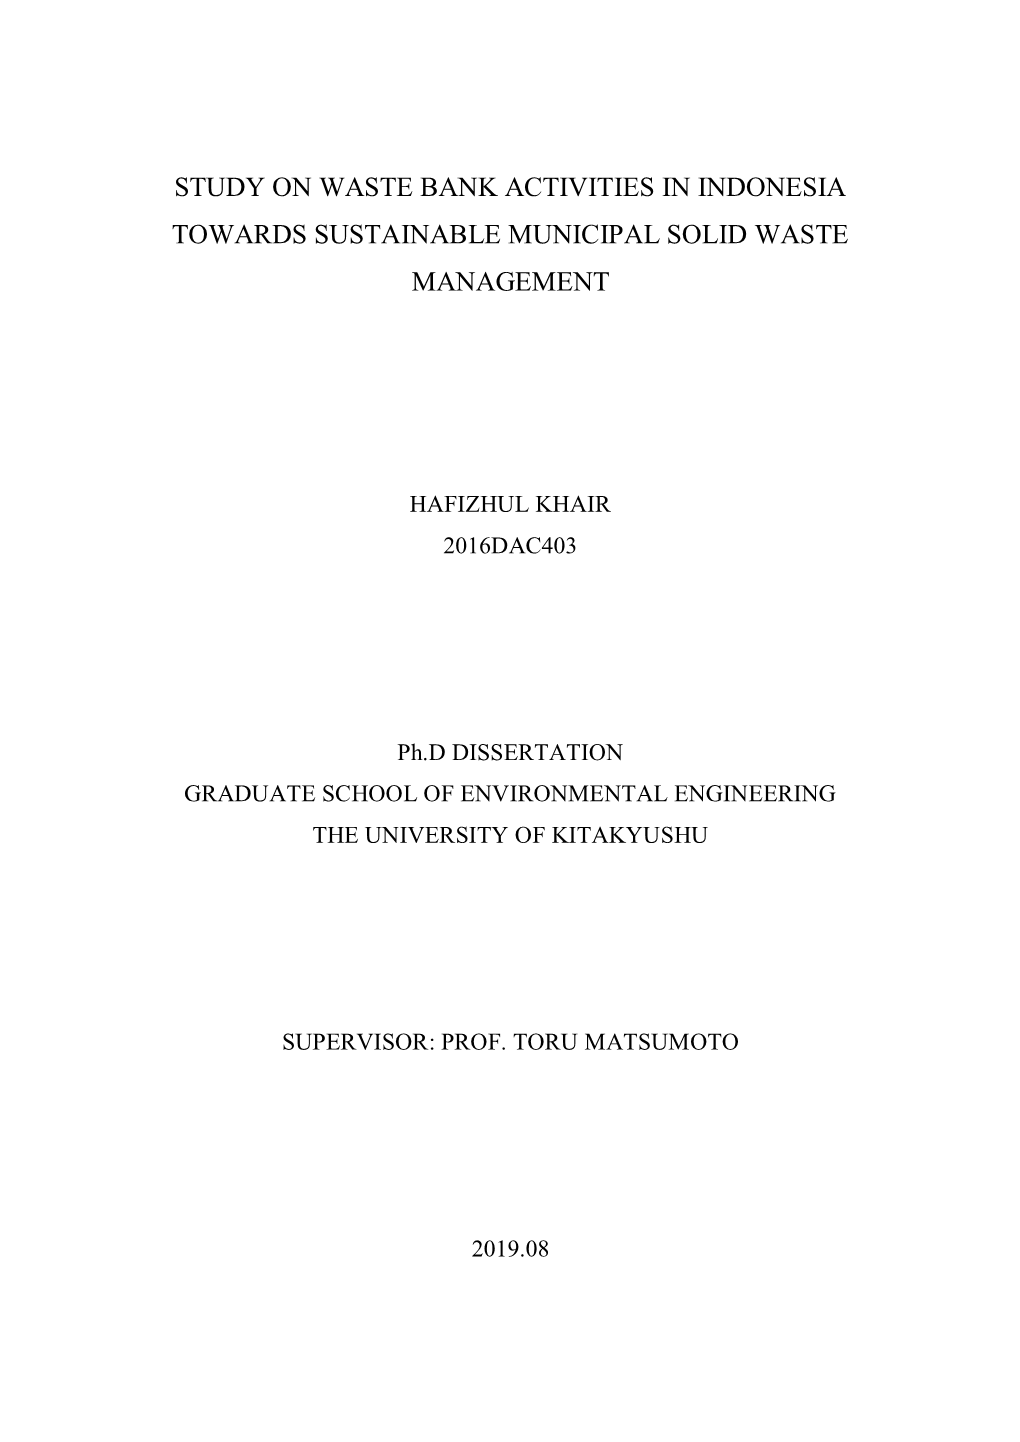 Study on Waste Bank Activities in Indonesia Towards Sustainable Municipal Solid Waste Management